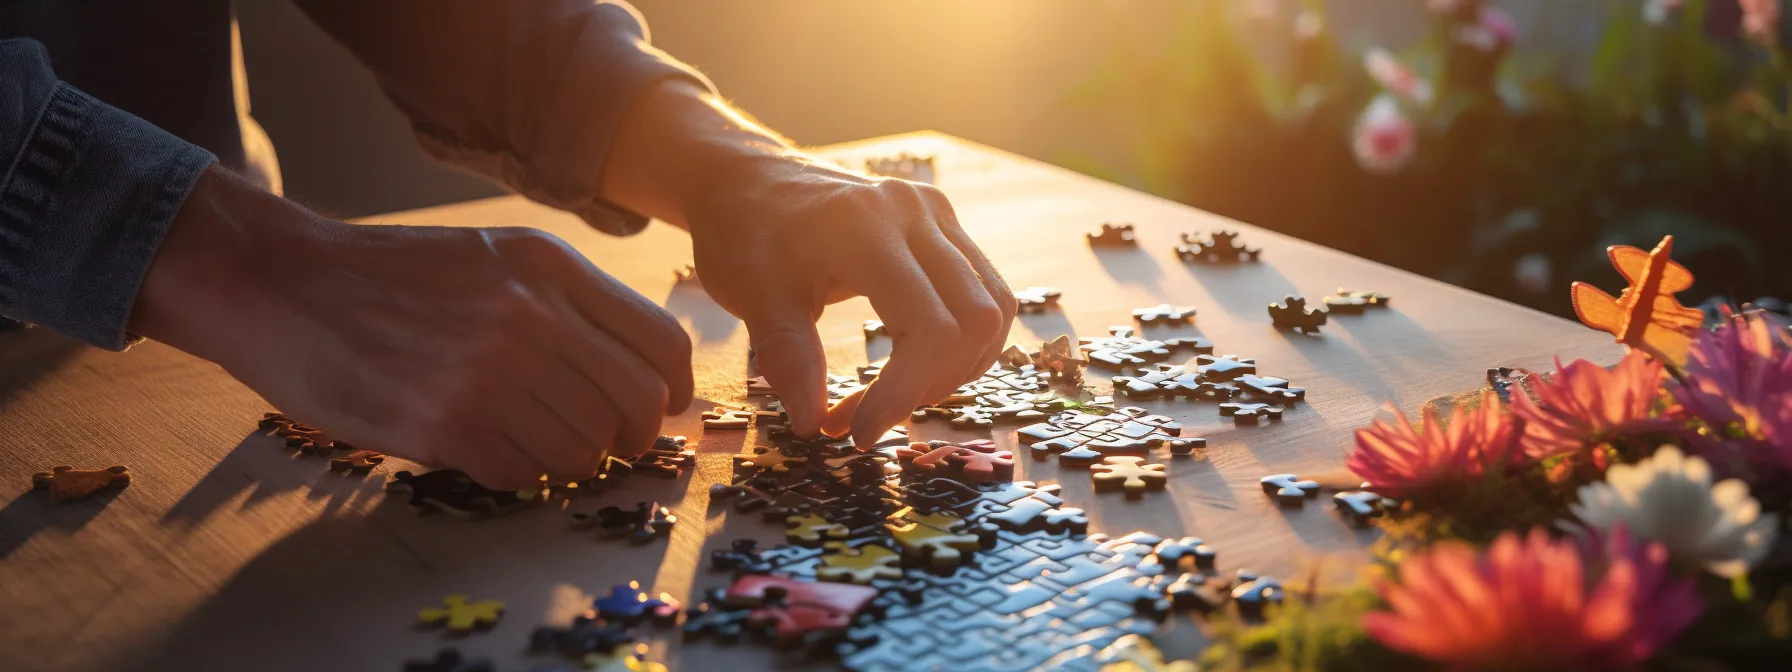 the photo shows a person carefully crafting and aligning puzzle pieces to create a complete picture, symbolizing the process of delivering on promises made in content.